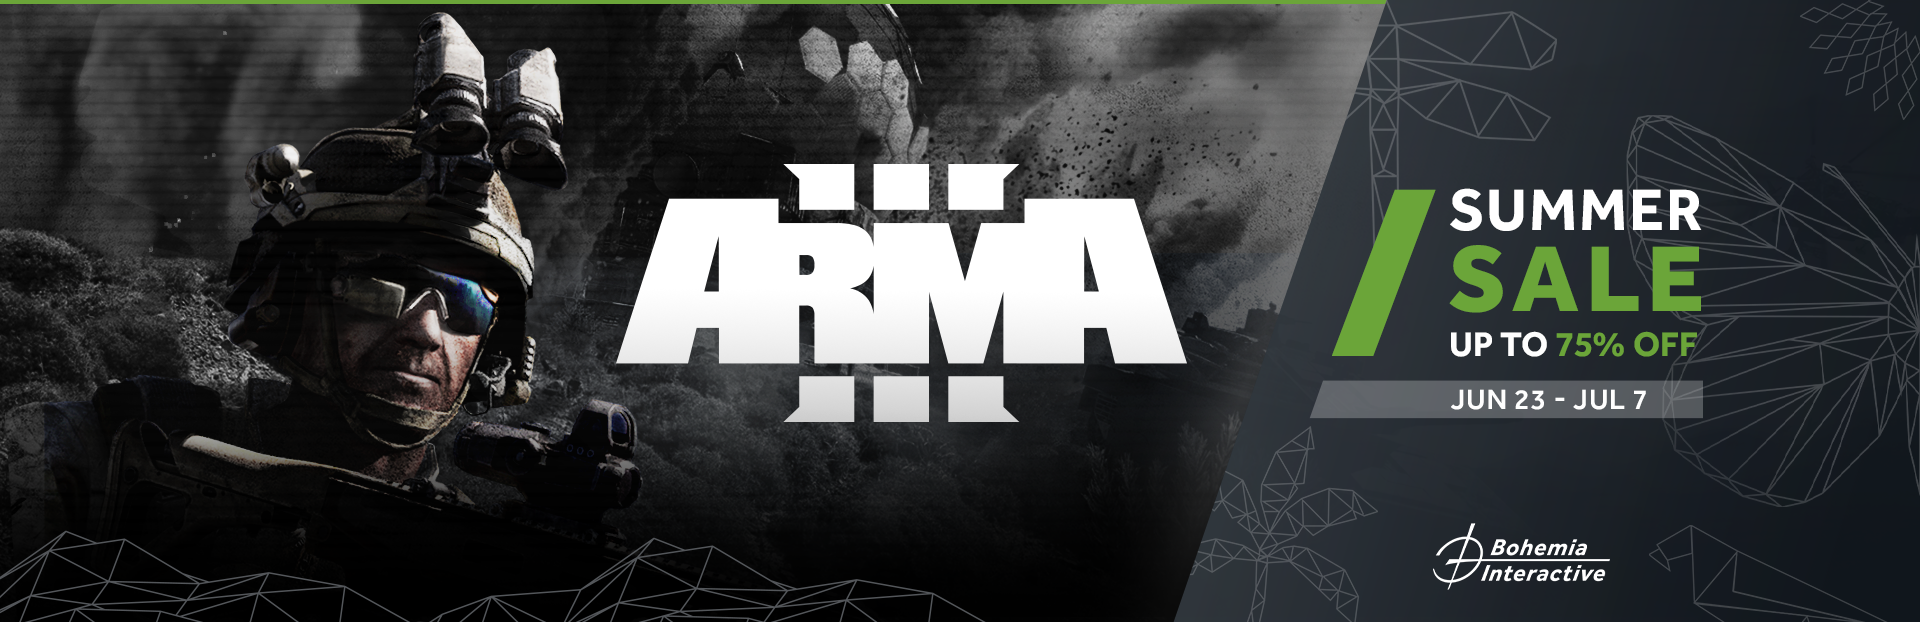 Steam Workshop Gameplay Mods Compilation List - ARMA 3 - ADDONS & MODS:  COMPLETE - Bohemia Interactive Forums